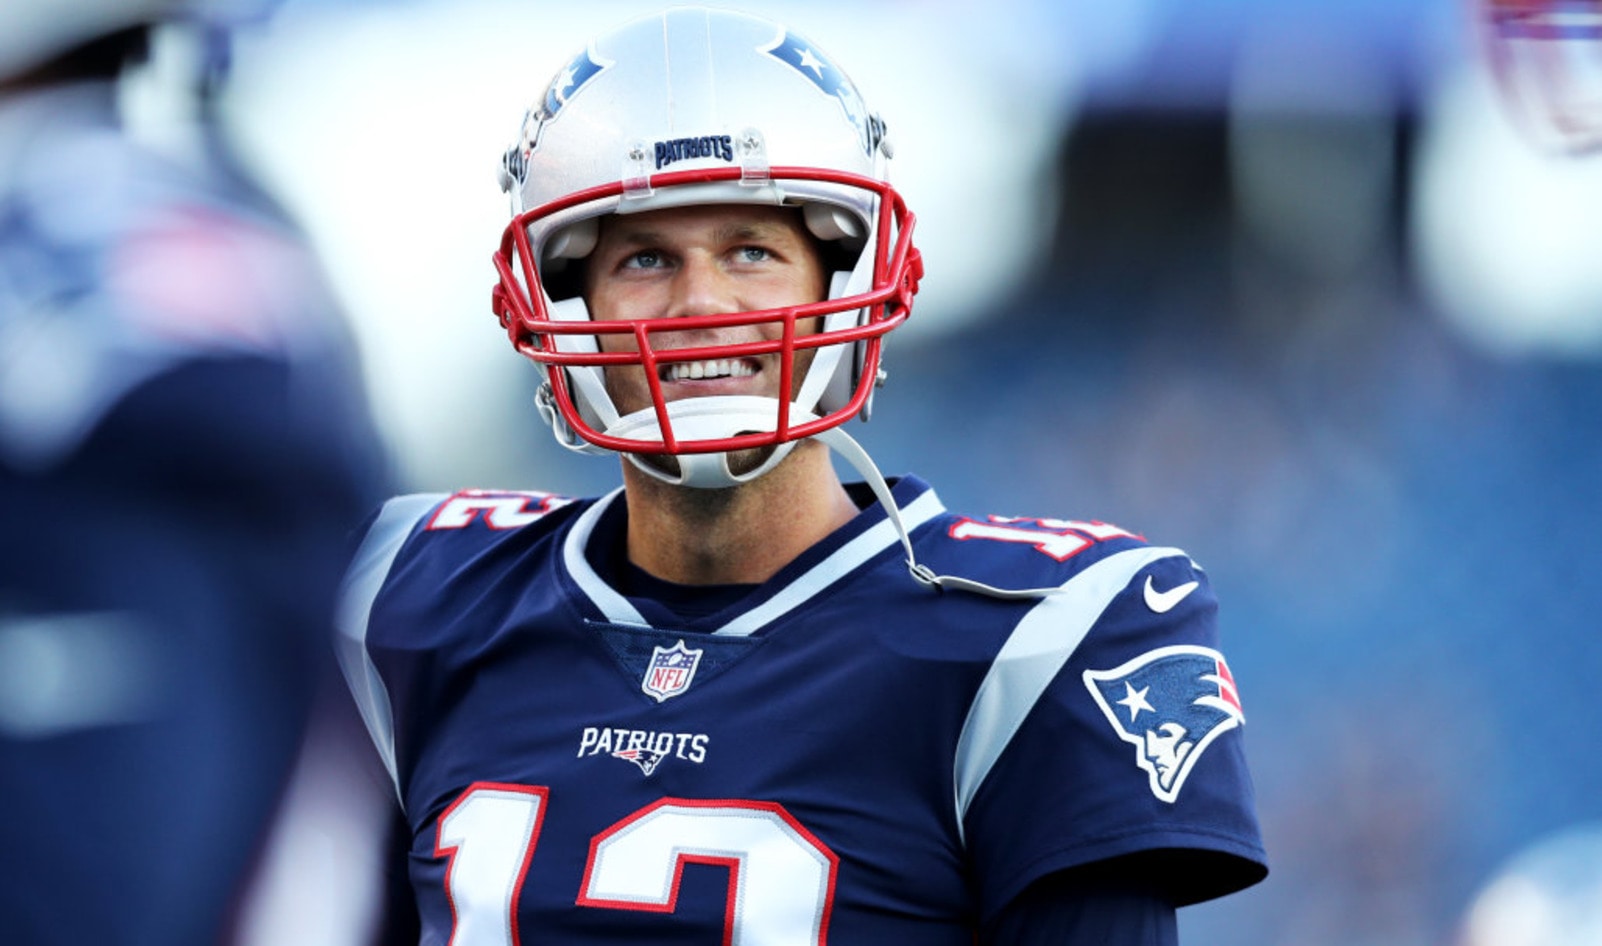 Tom Brady Launches Vegan Protein to "Shake up" the Super Bowl&nbsp;